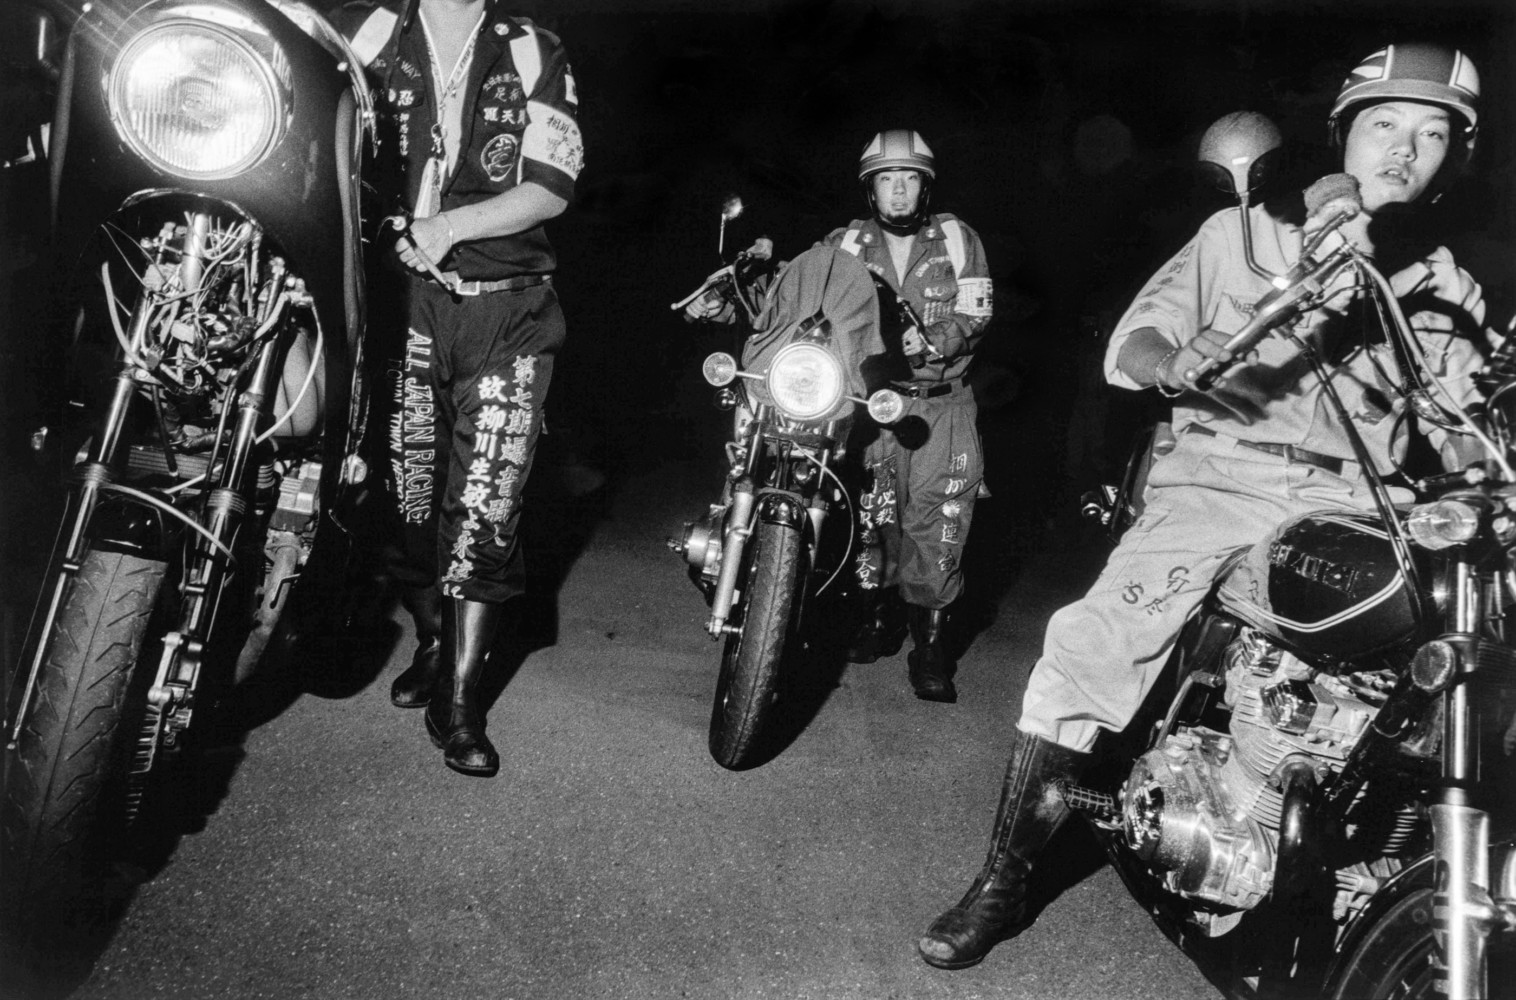 Bikers abandon a motorcycle meeting while being pursued by police. (Photo Credit: Kamonomiya. Japan. 1999. © Bruce Gilden | Magnum Photos; used by permission)